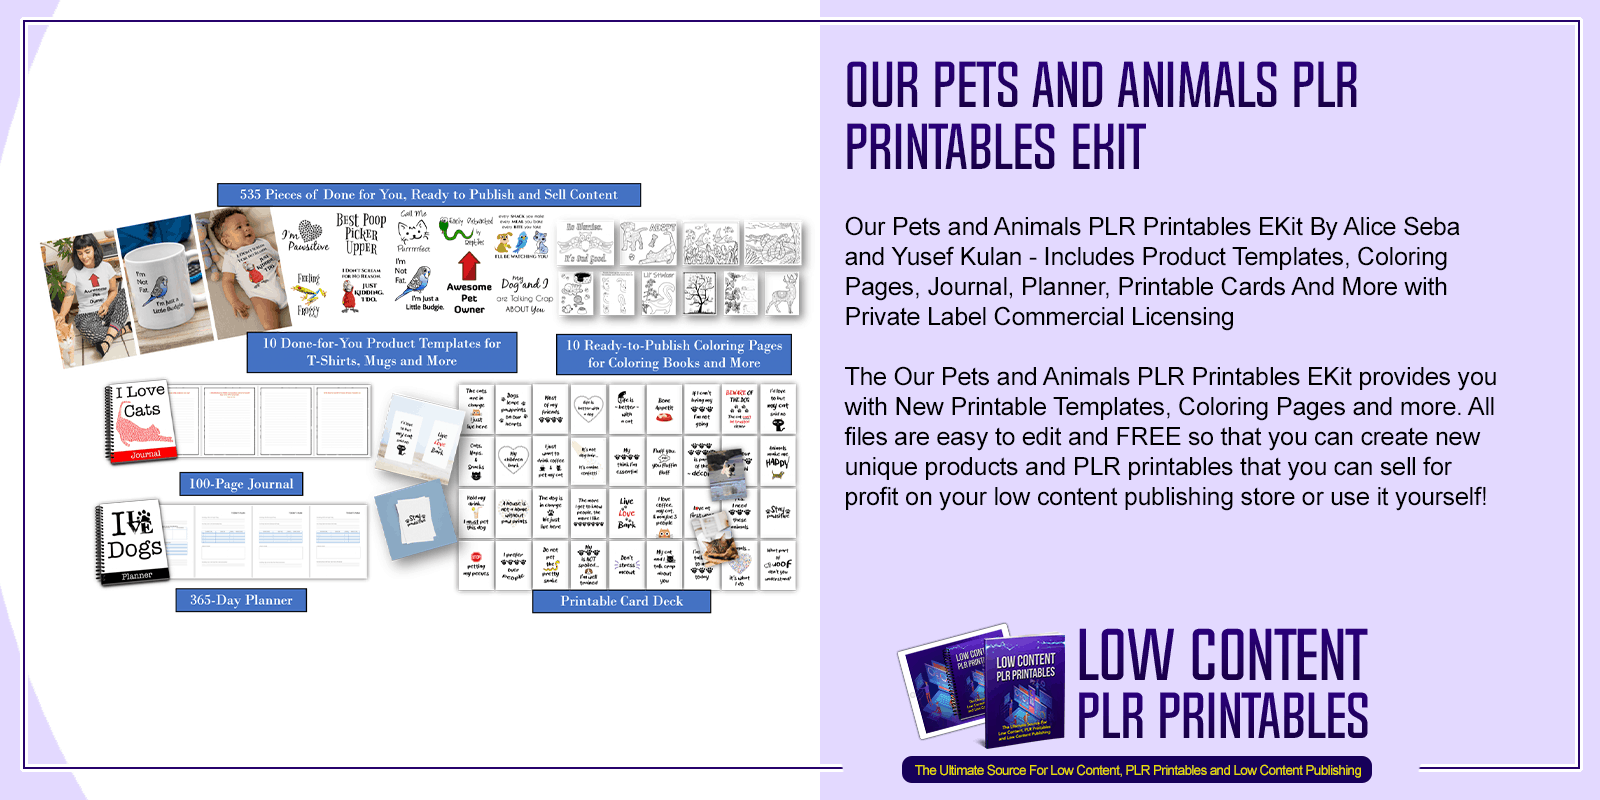 Our Pets and Animals PLR Printables EKit